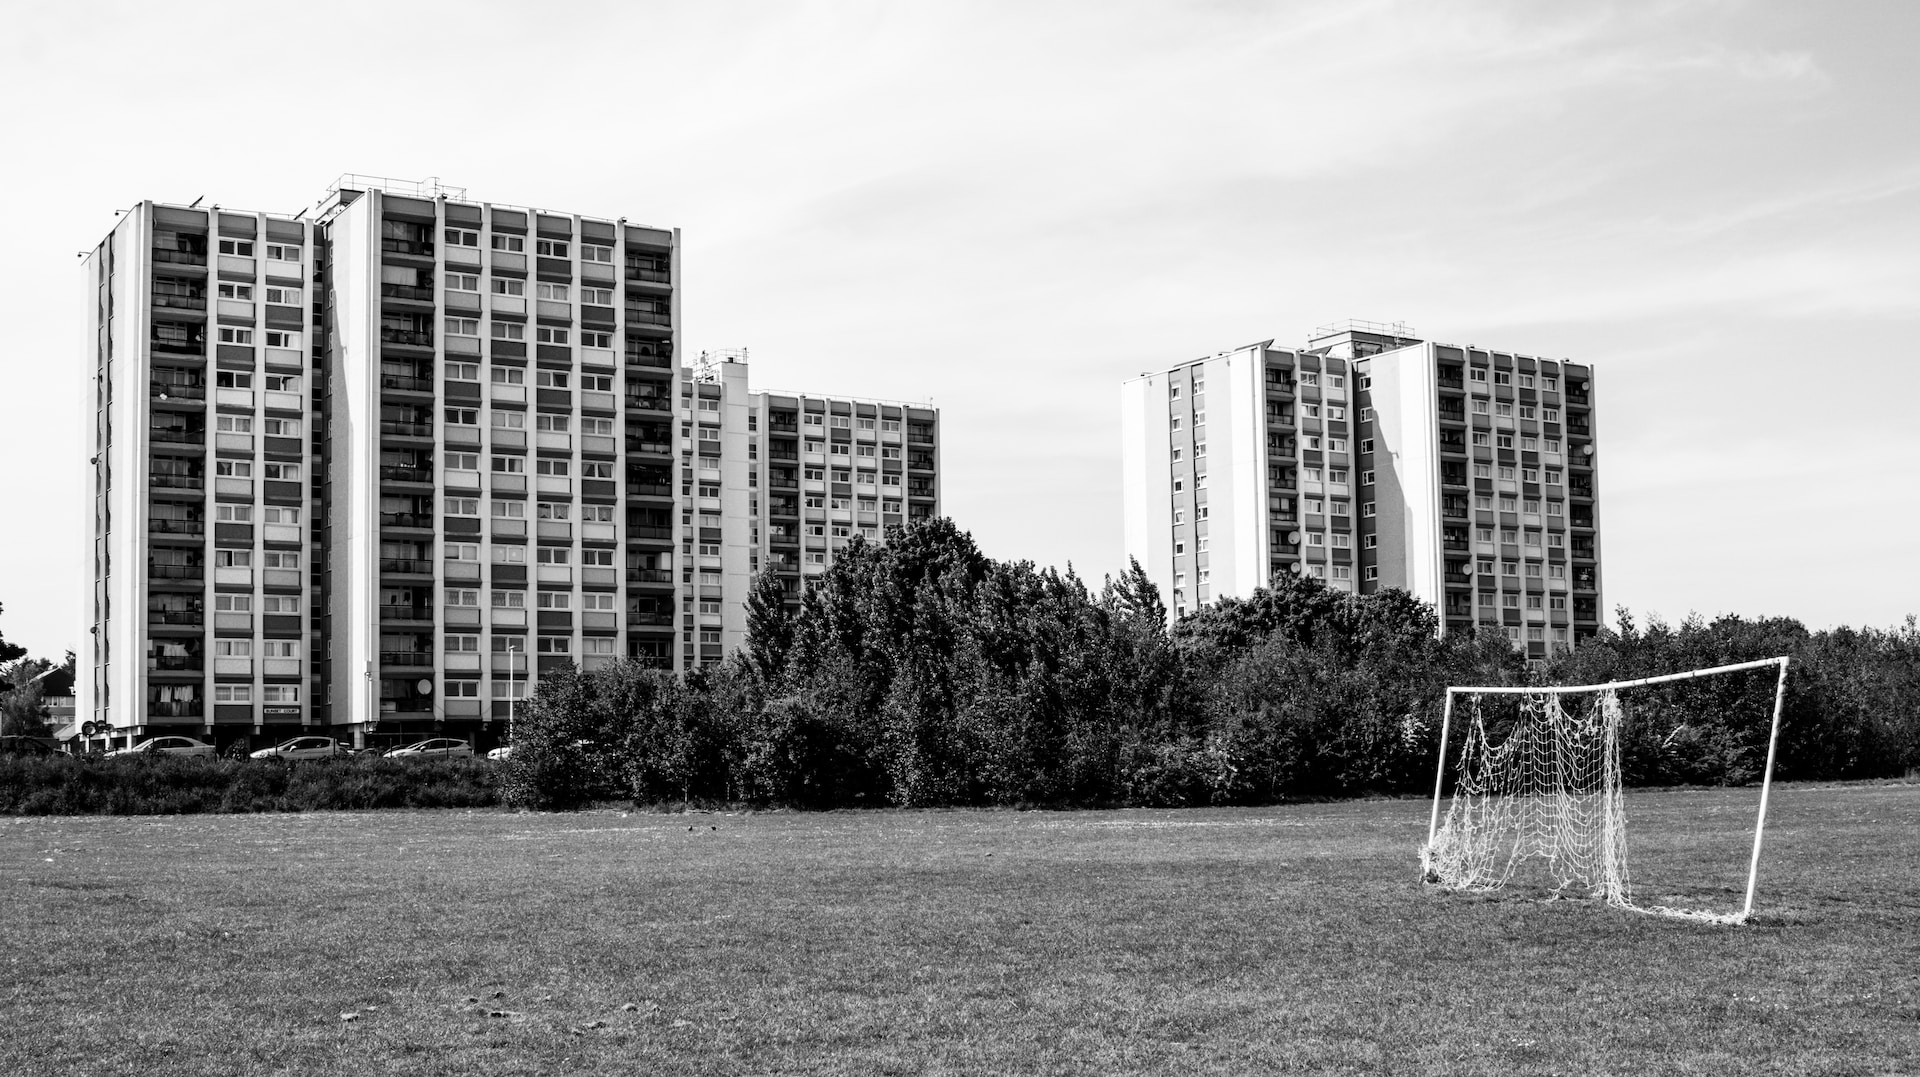 black and white photo of two blocks of high rise flats behind a football net.